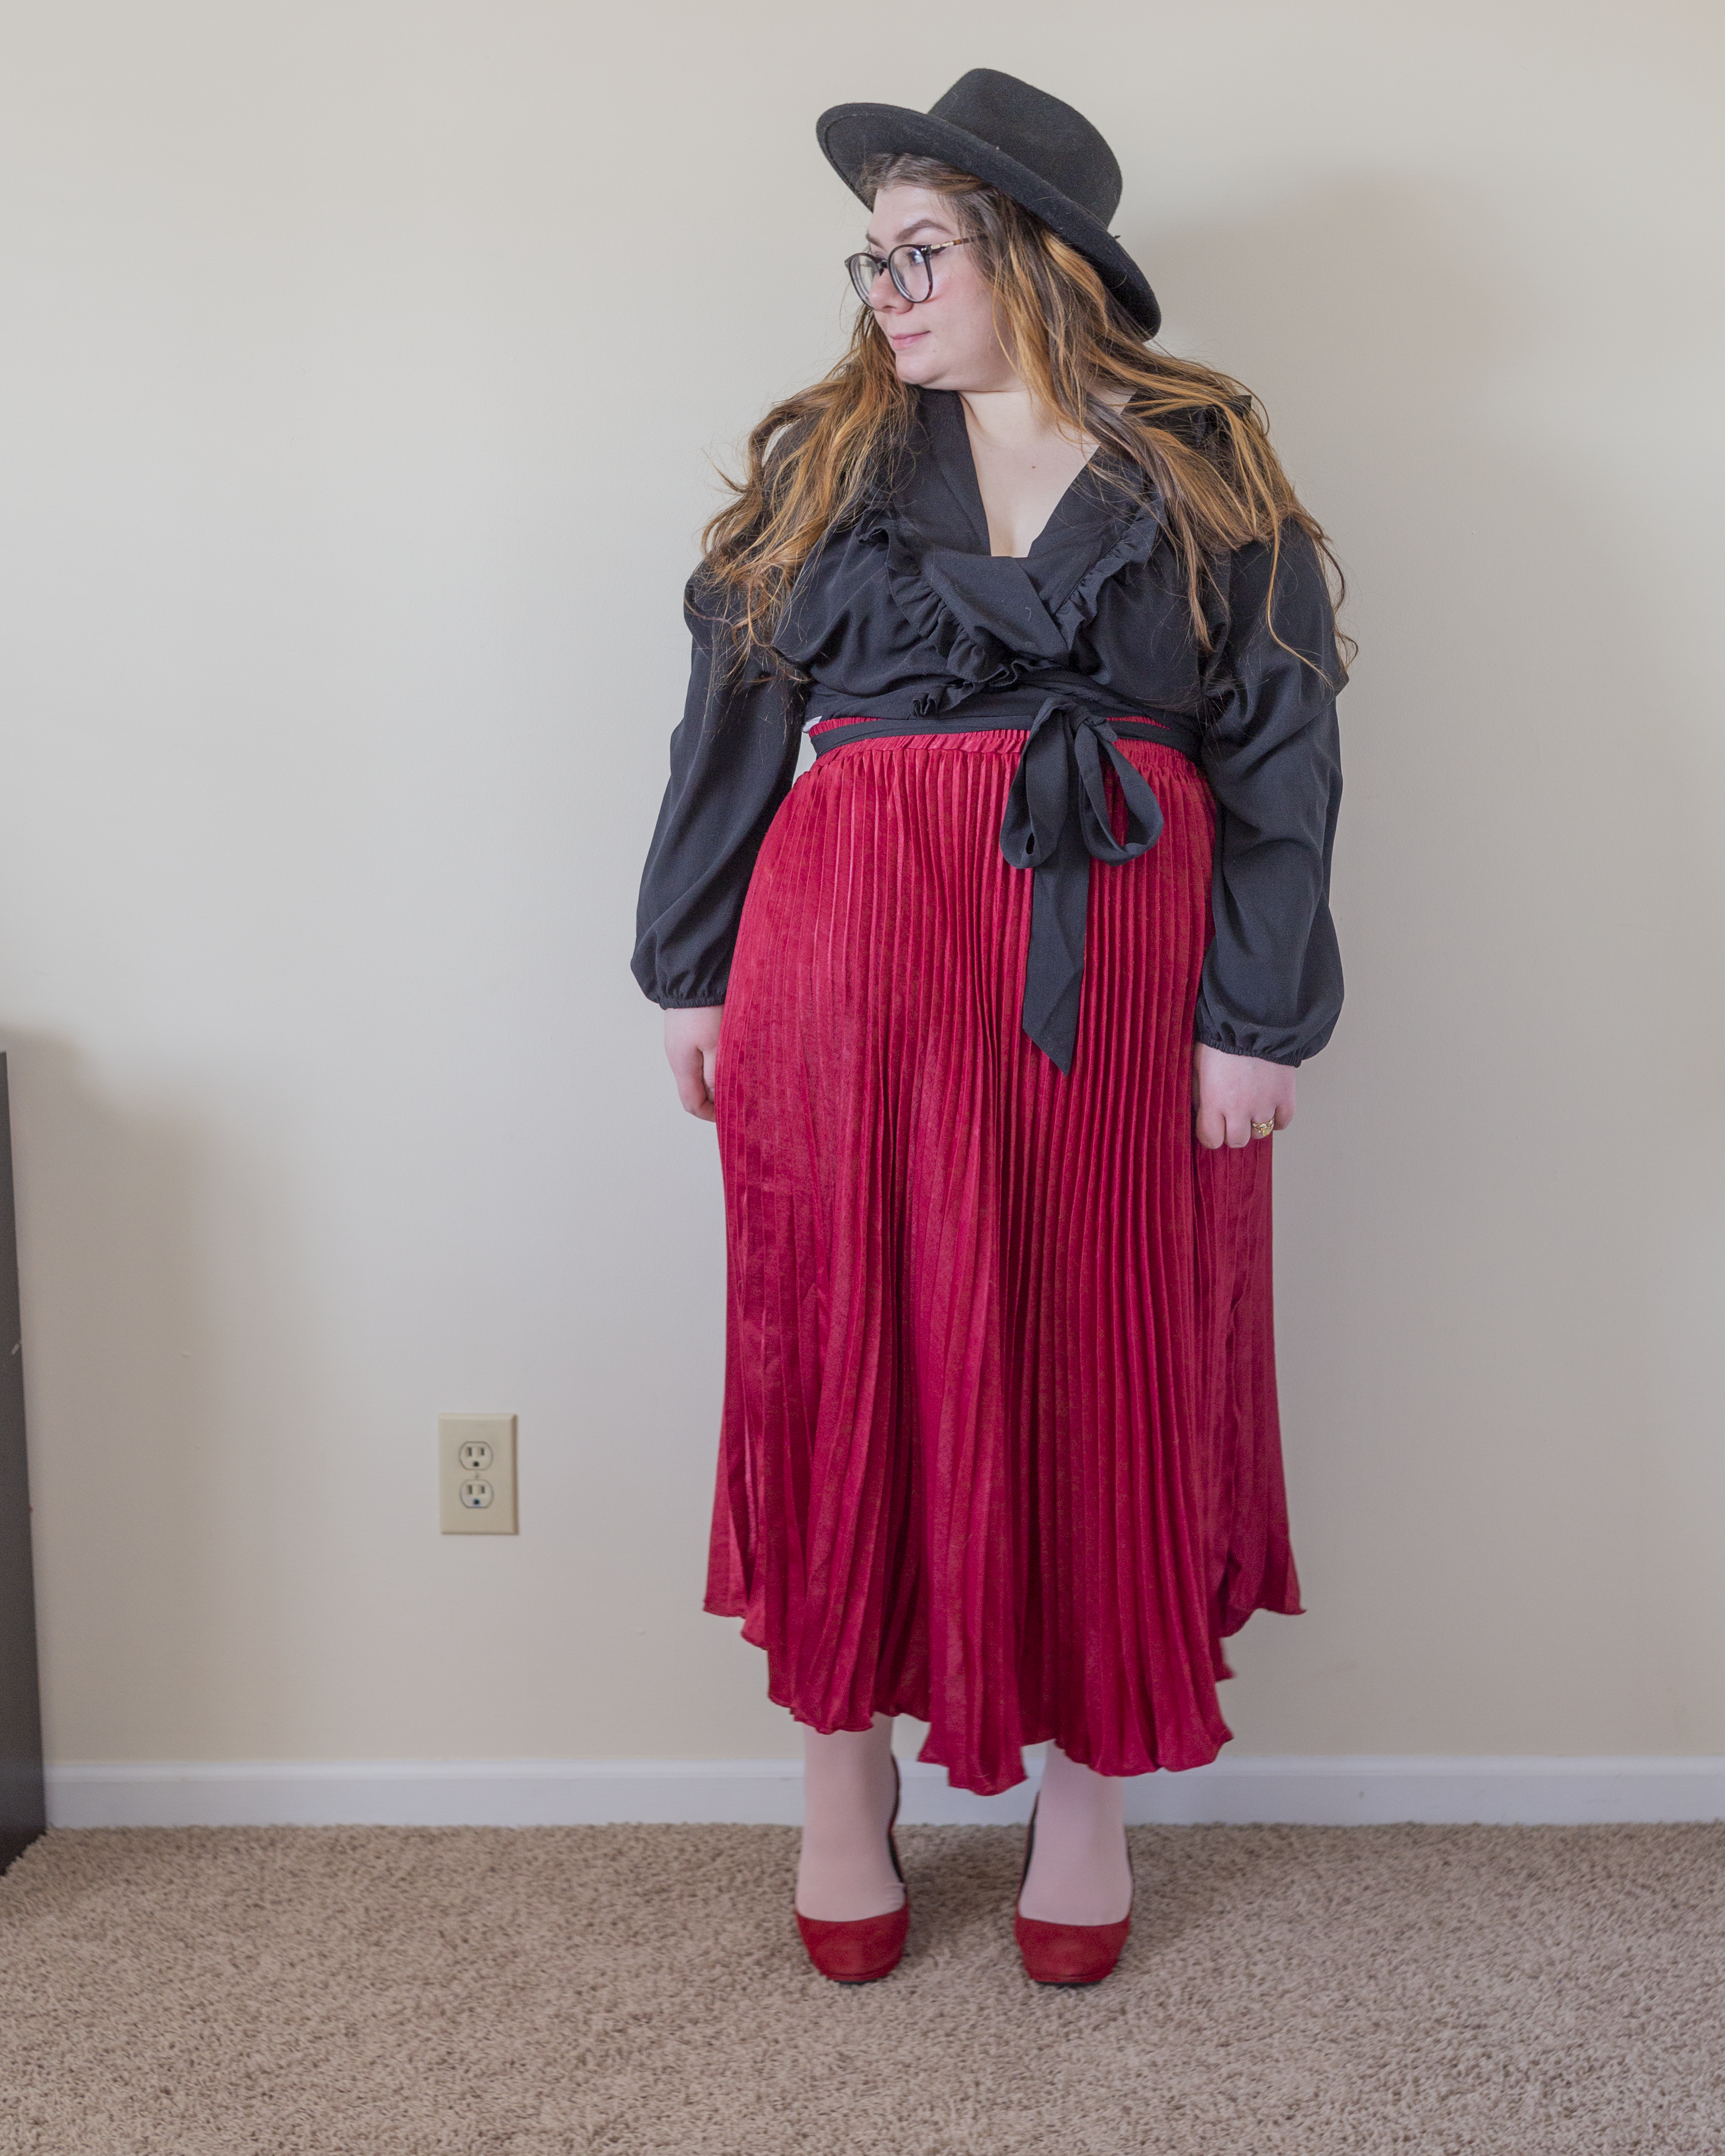 An outfit consisting of a black wrap top with a ruffle bodice, a wine red pleated maxi skirt, and red round toe slingback heels.